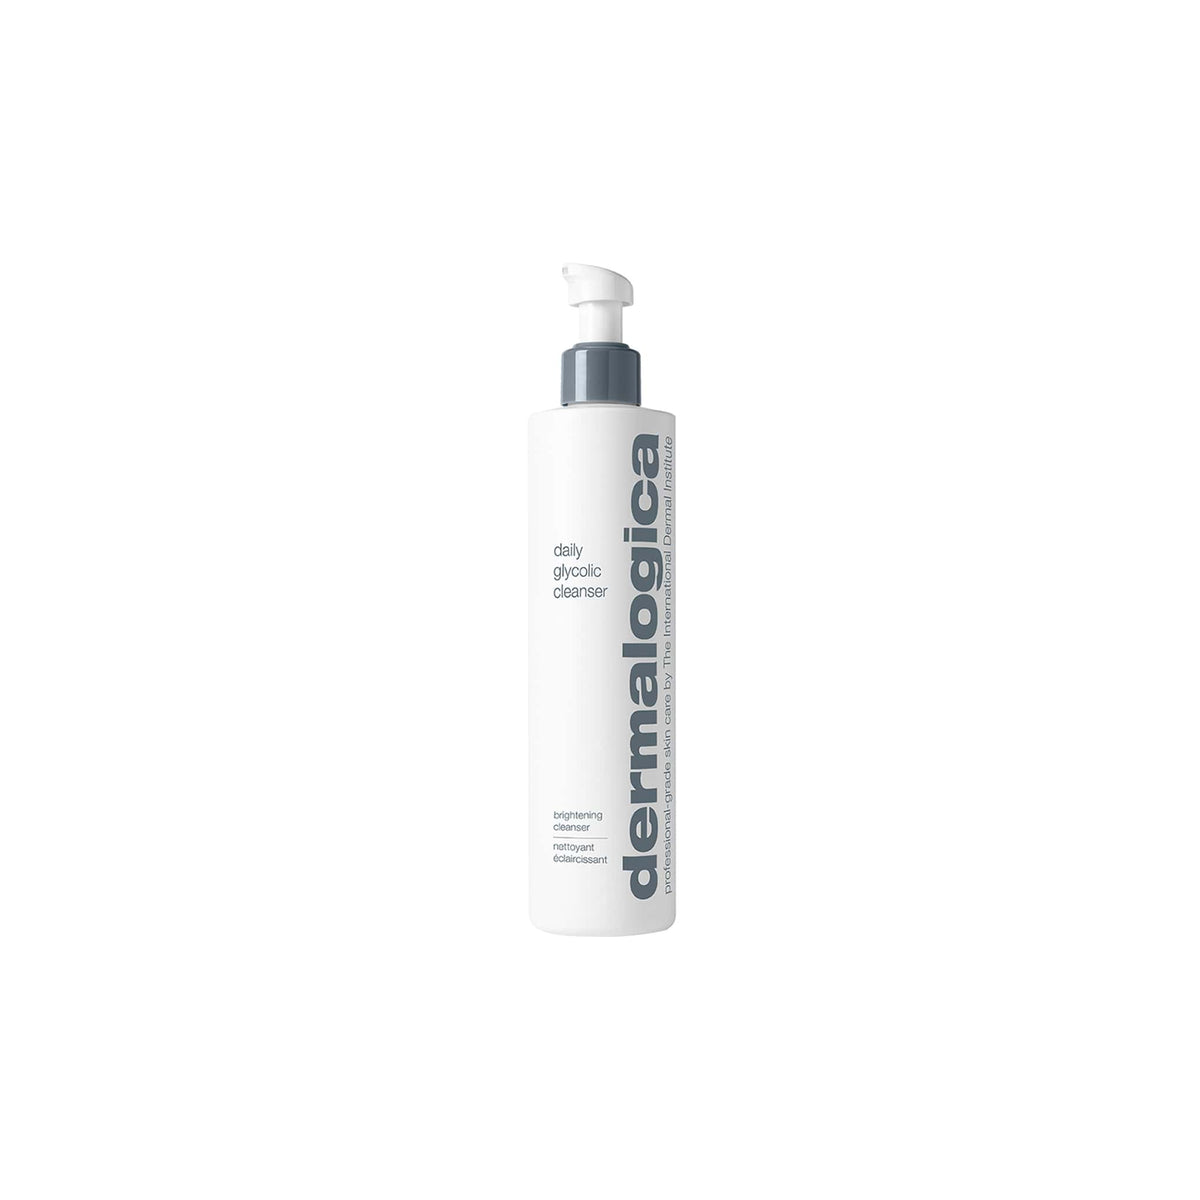 Dermalogica Daily Glycolic Cleanser - Shop Online | Retail Box